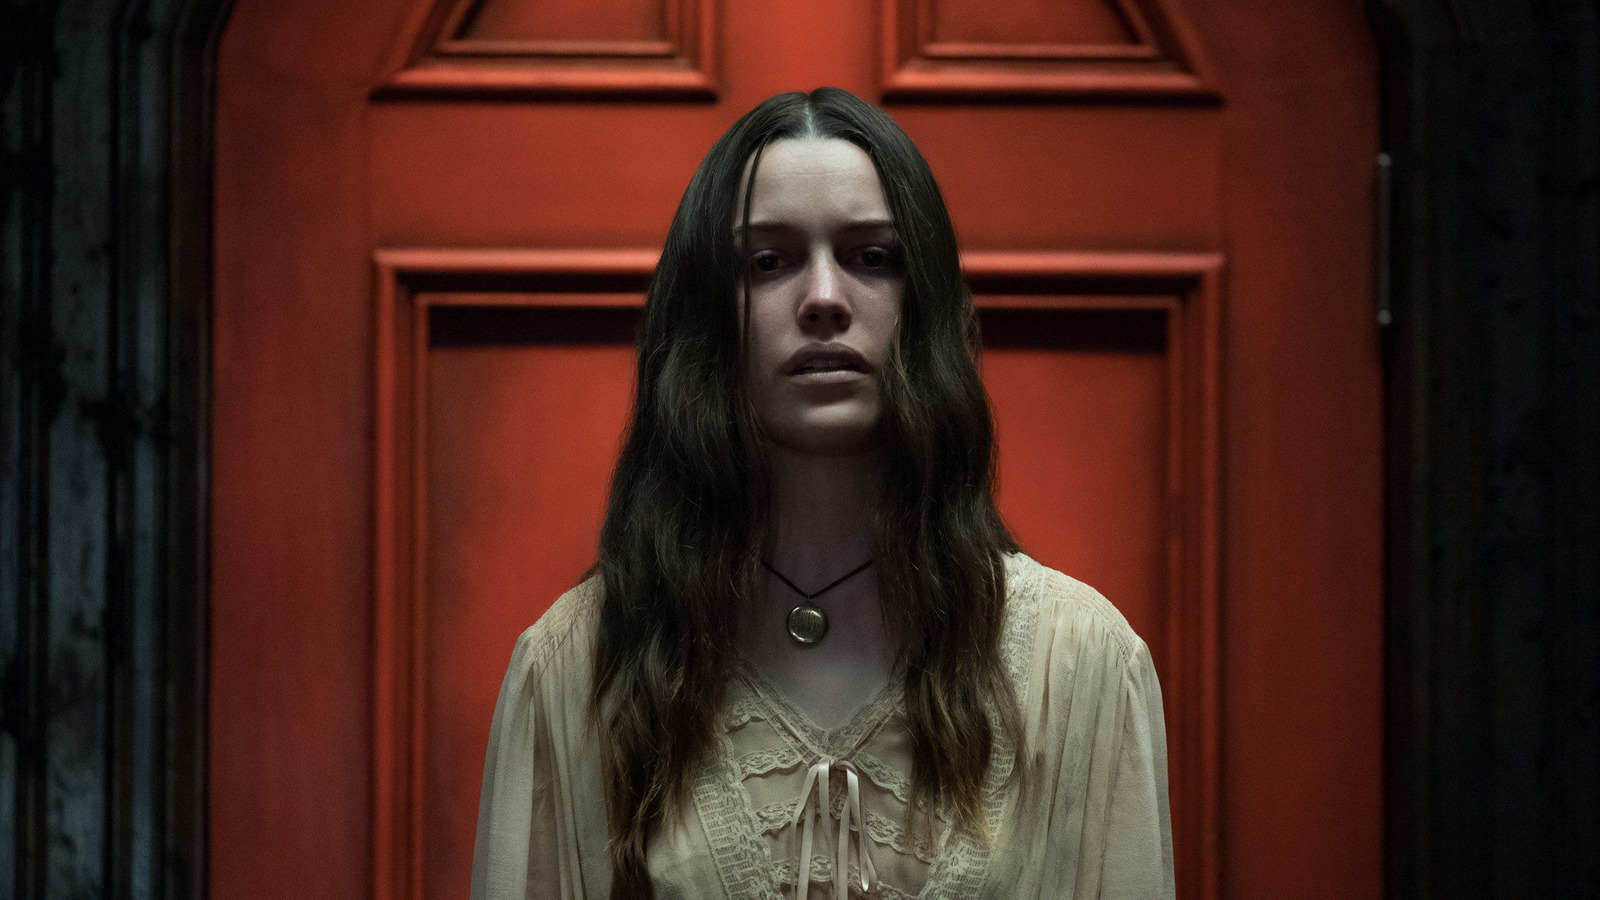 The Haunting Of Hill House Ending Explained: And Those Who Walk There Walk Together